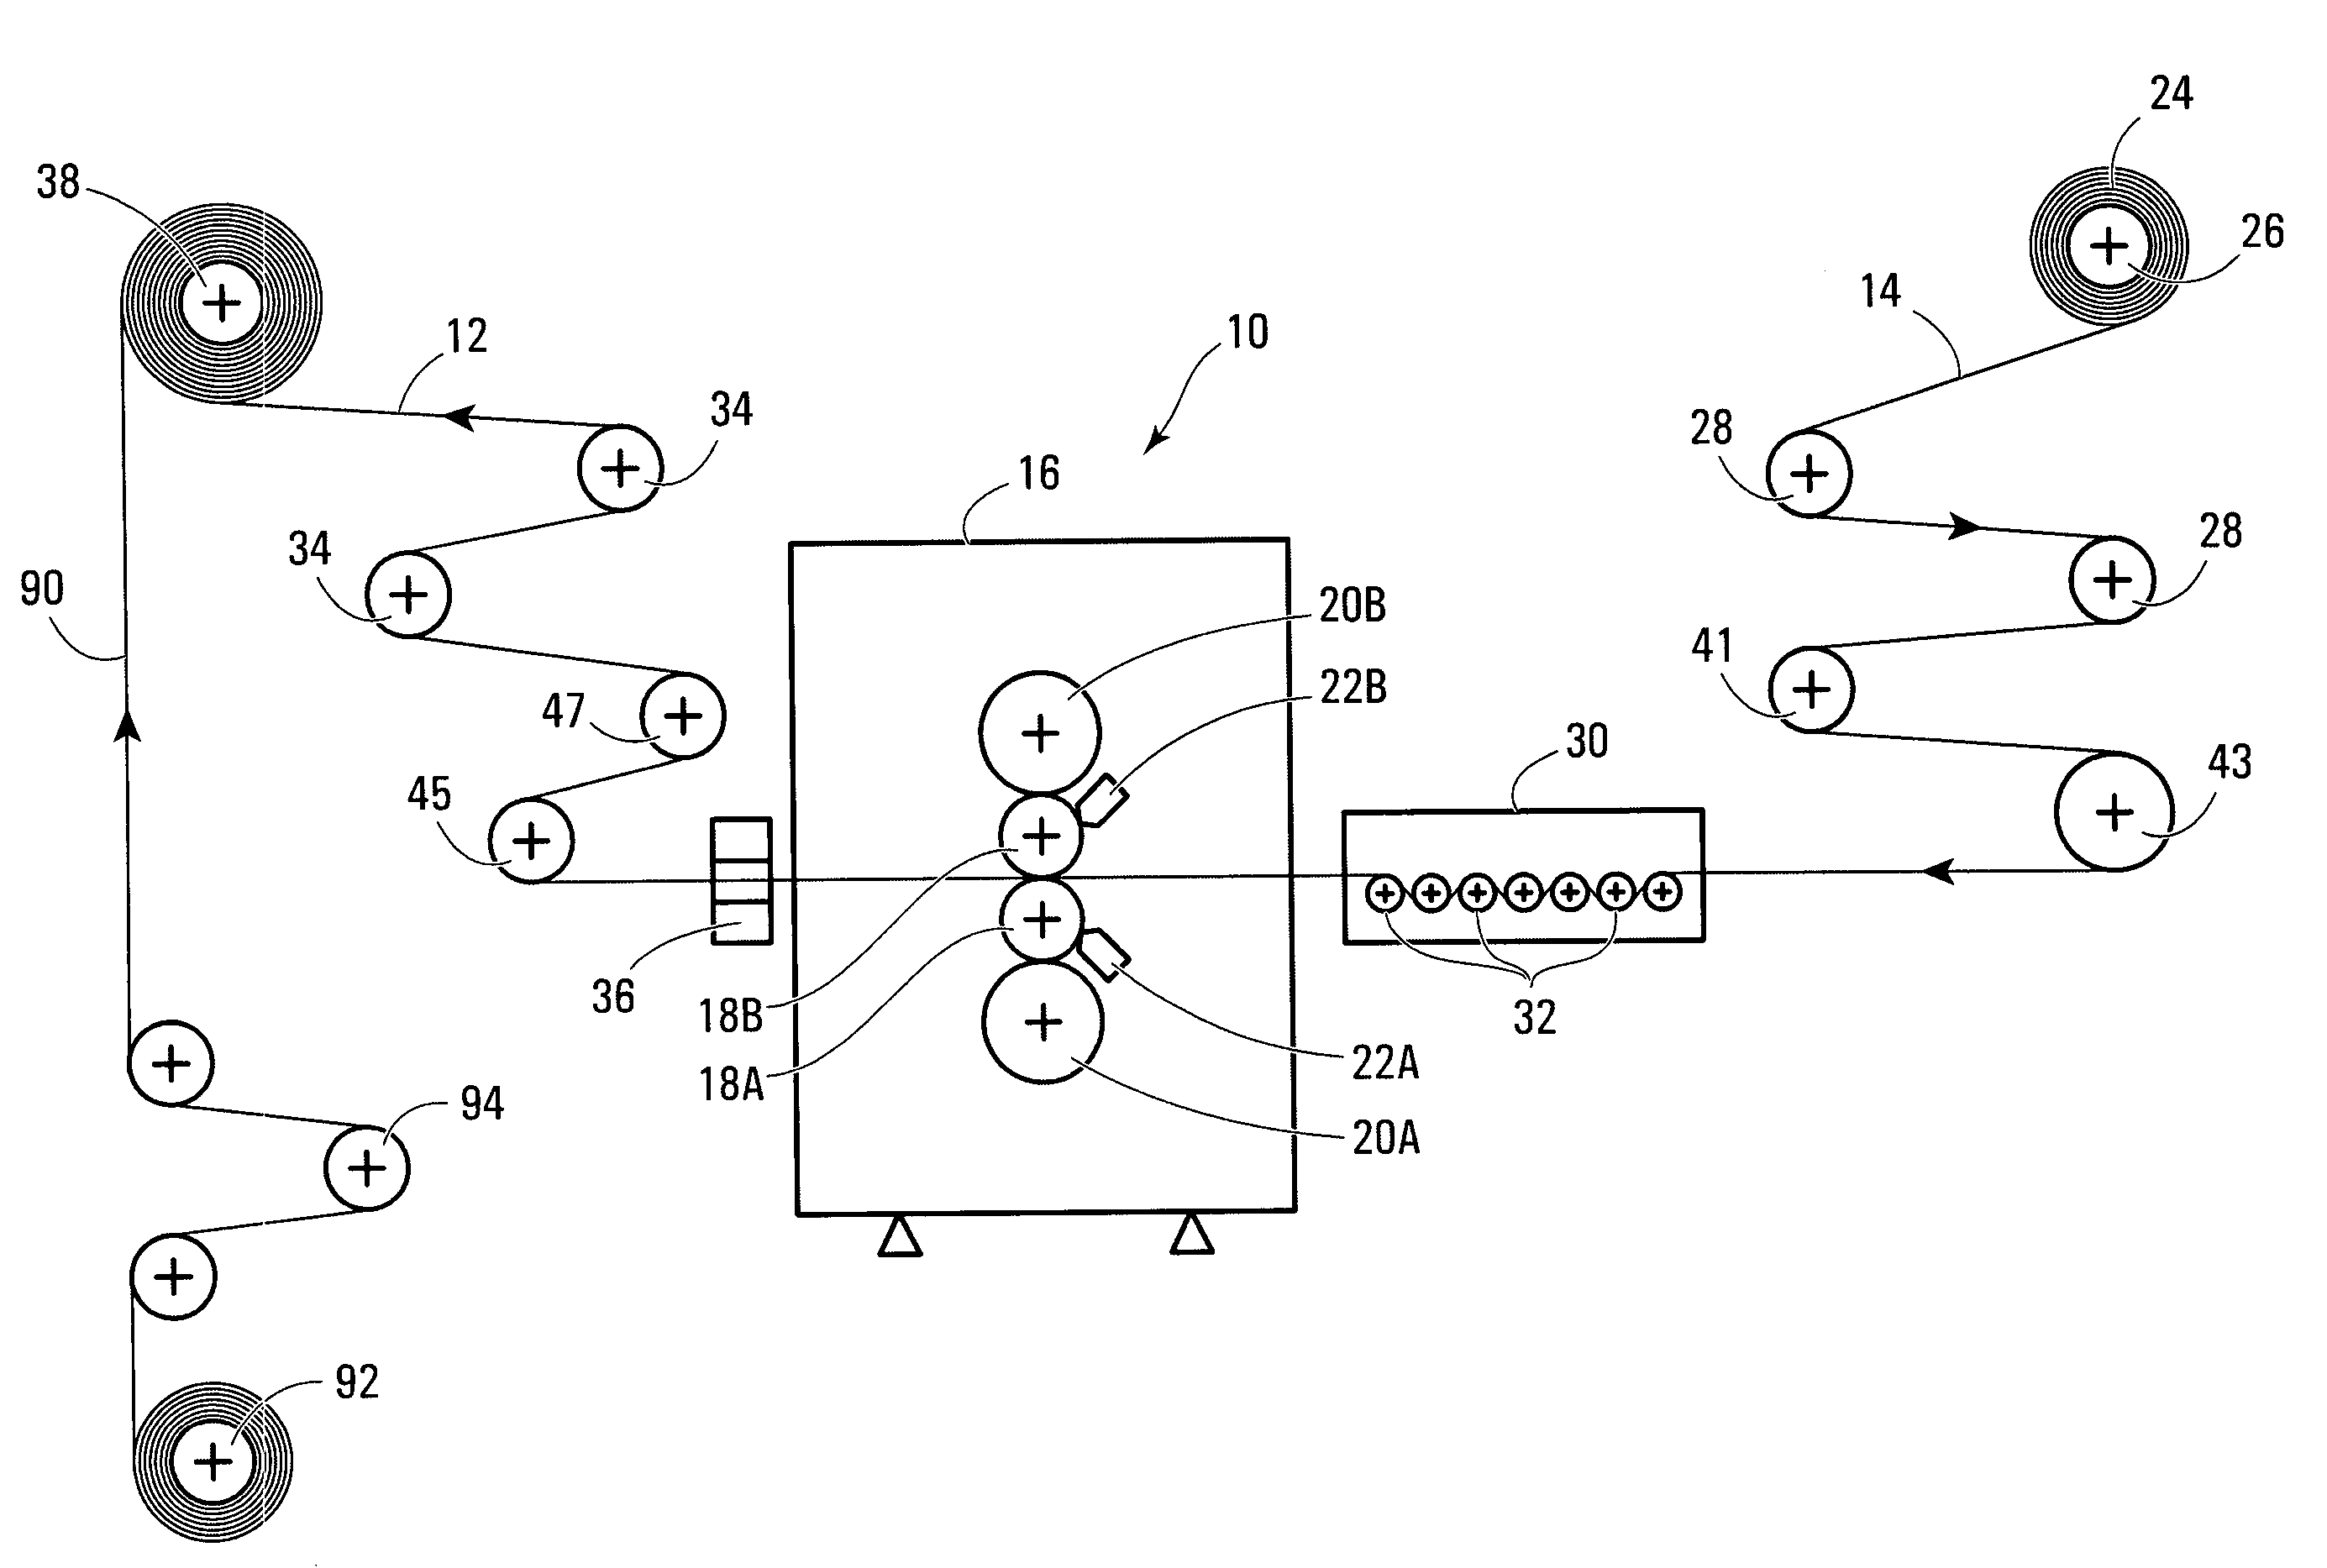 Lamination process and apparatus for alkali metals or alloys thereof